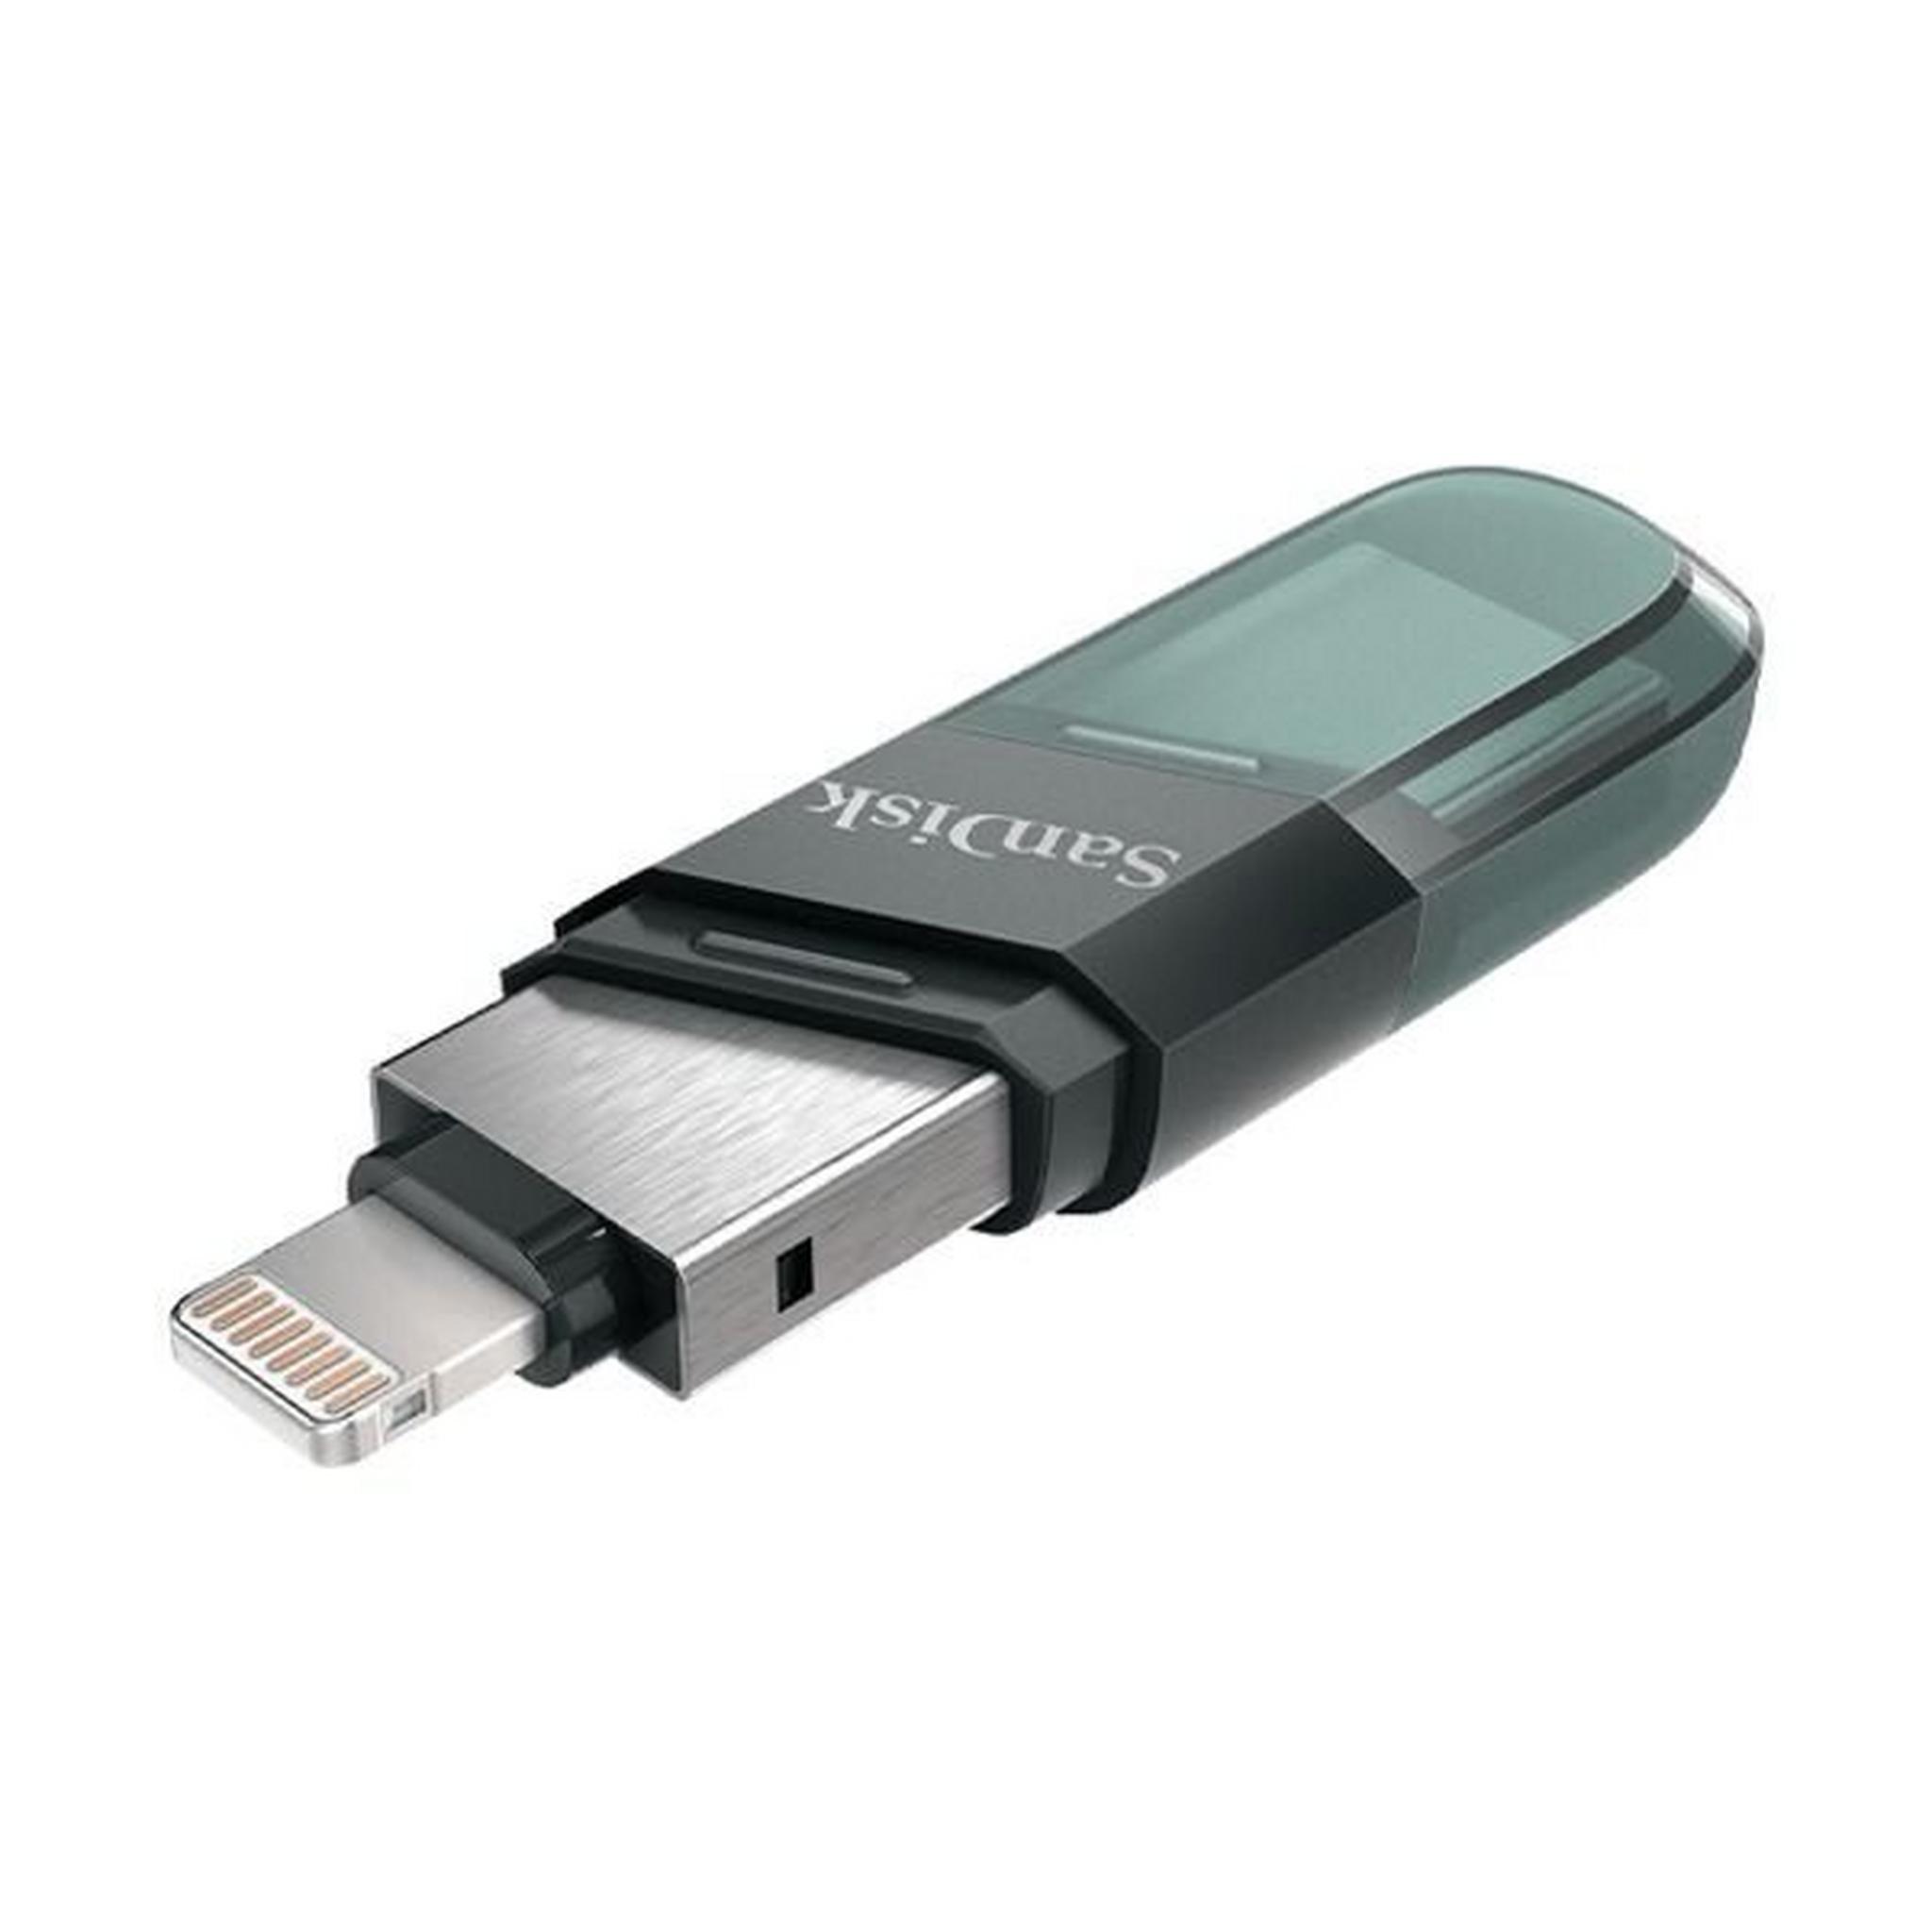 SanDisk 32GB iXpand Flip Flash Drive USB 3.1 and Lightening, for iOS, Windows and Mac